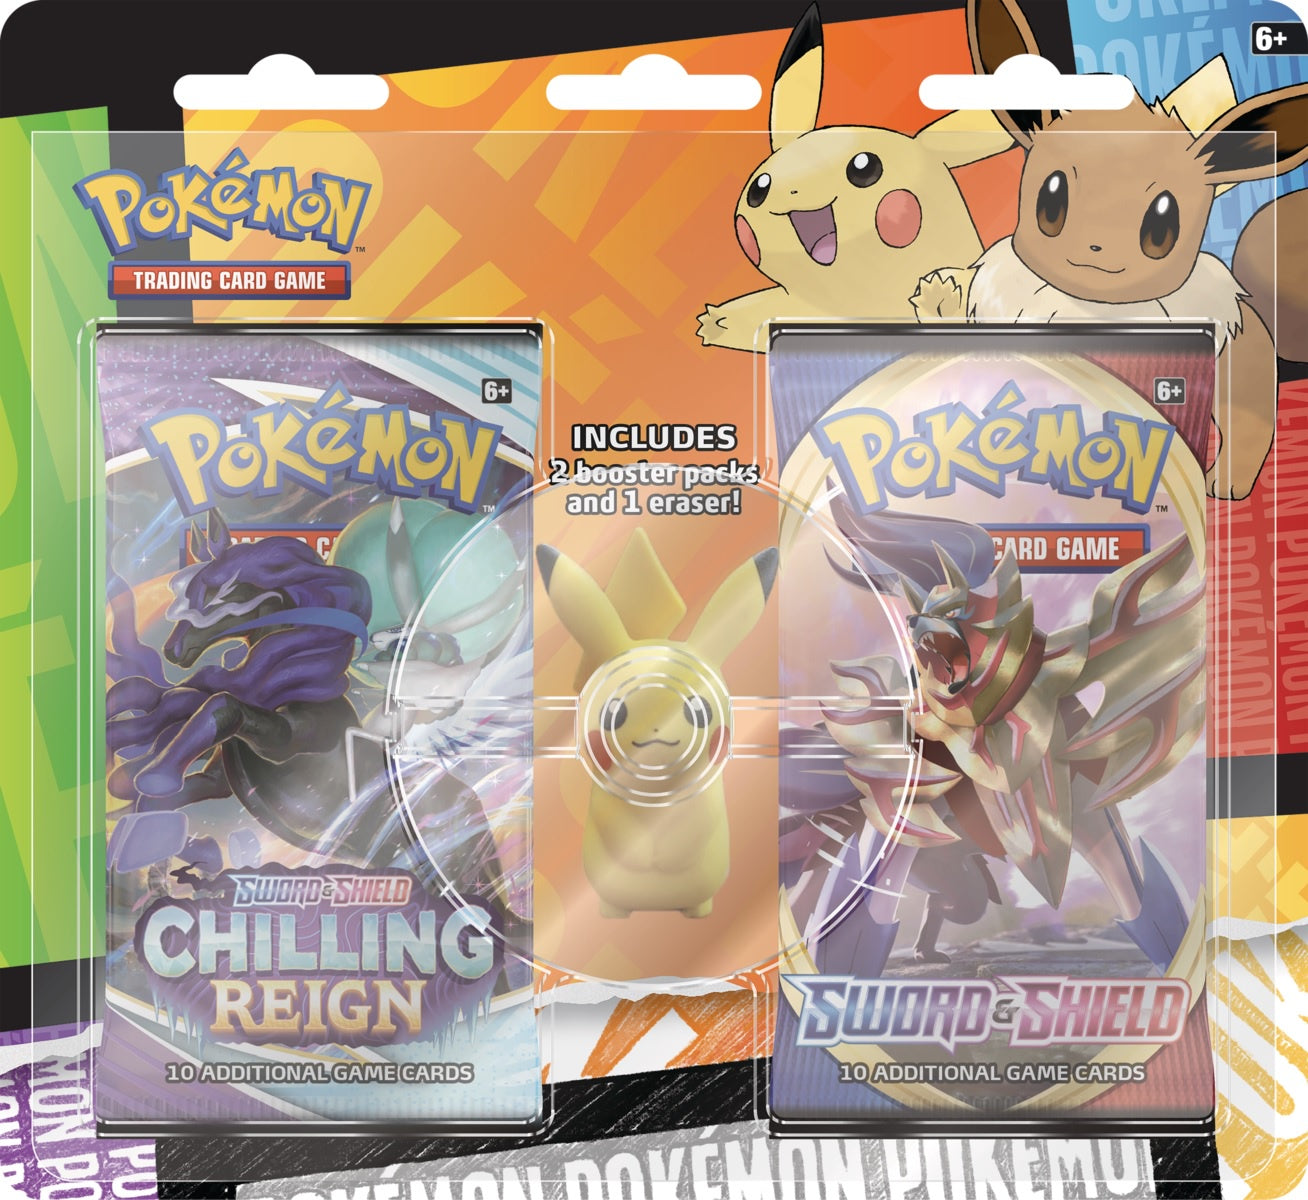 Pokemon - Back to School Blister (Includes 2 Booster Packs and 1 Eraser!) - Pikachu